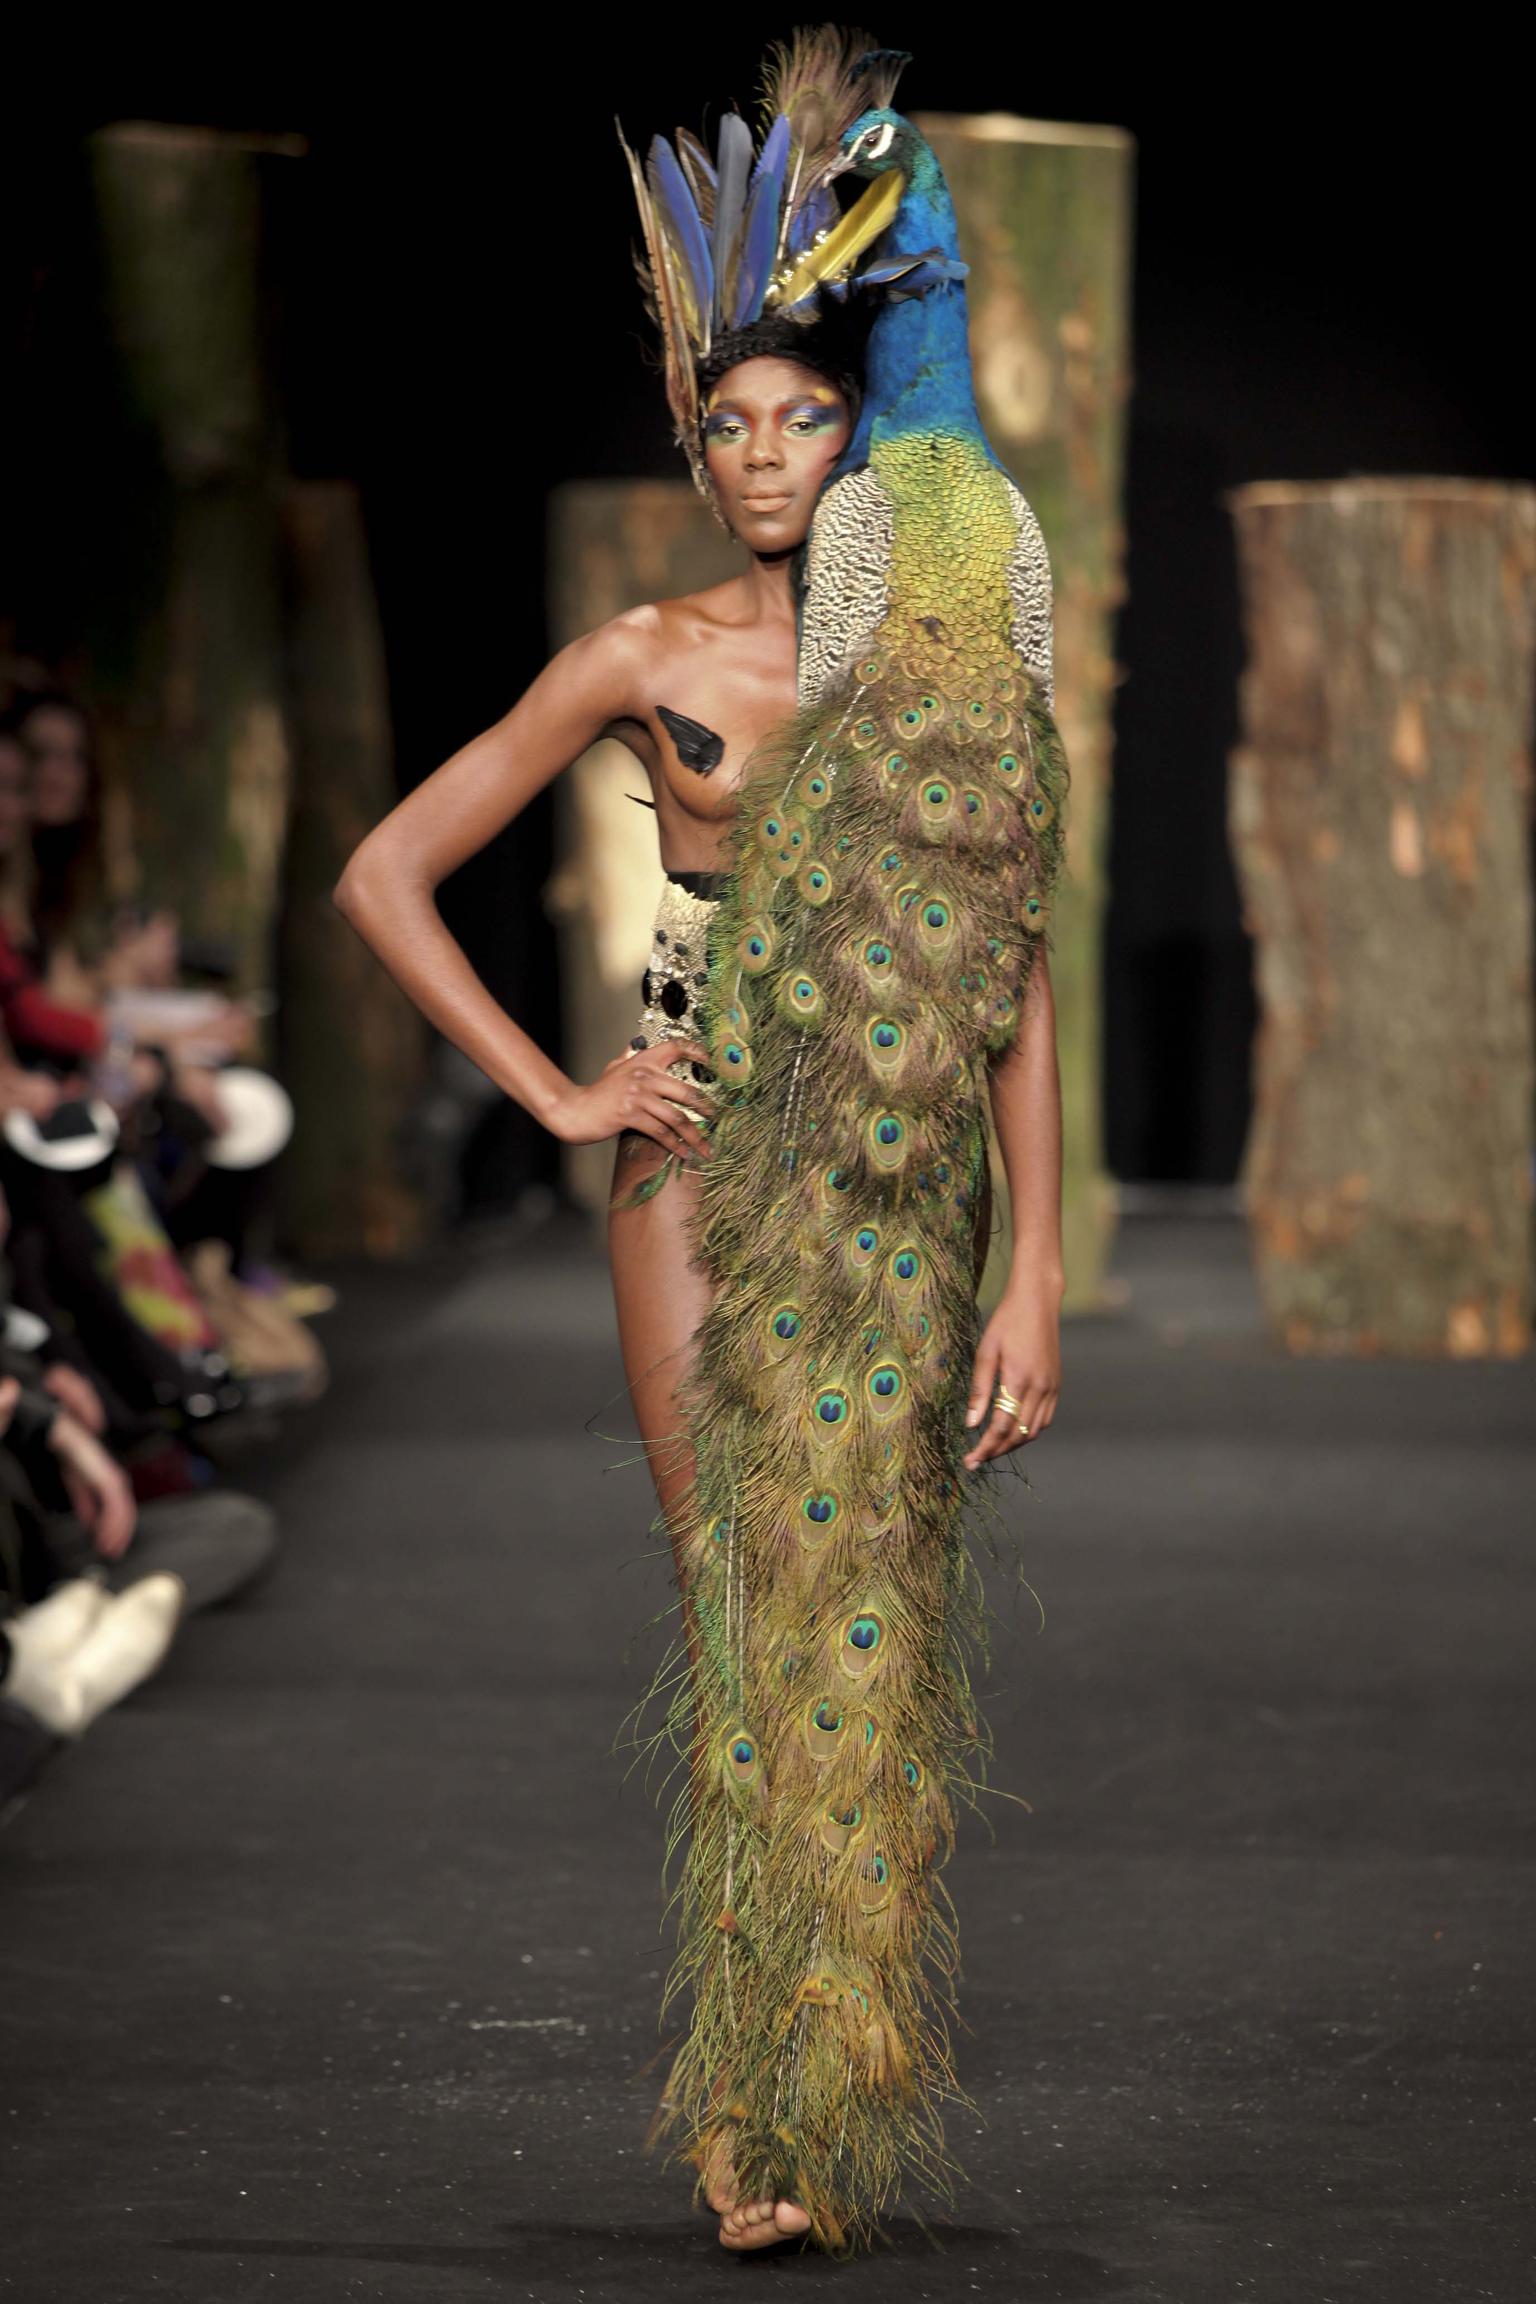 Blurring the line between sculpture and jewellery, Bibi van der Velden has put on catwalk shows highlighting her more avant-garde creations, including this stuffed peacock, which drapes over the body like the most regal jewel